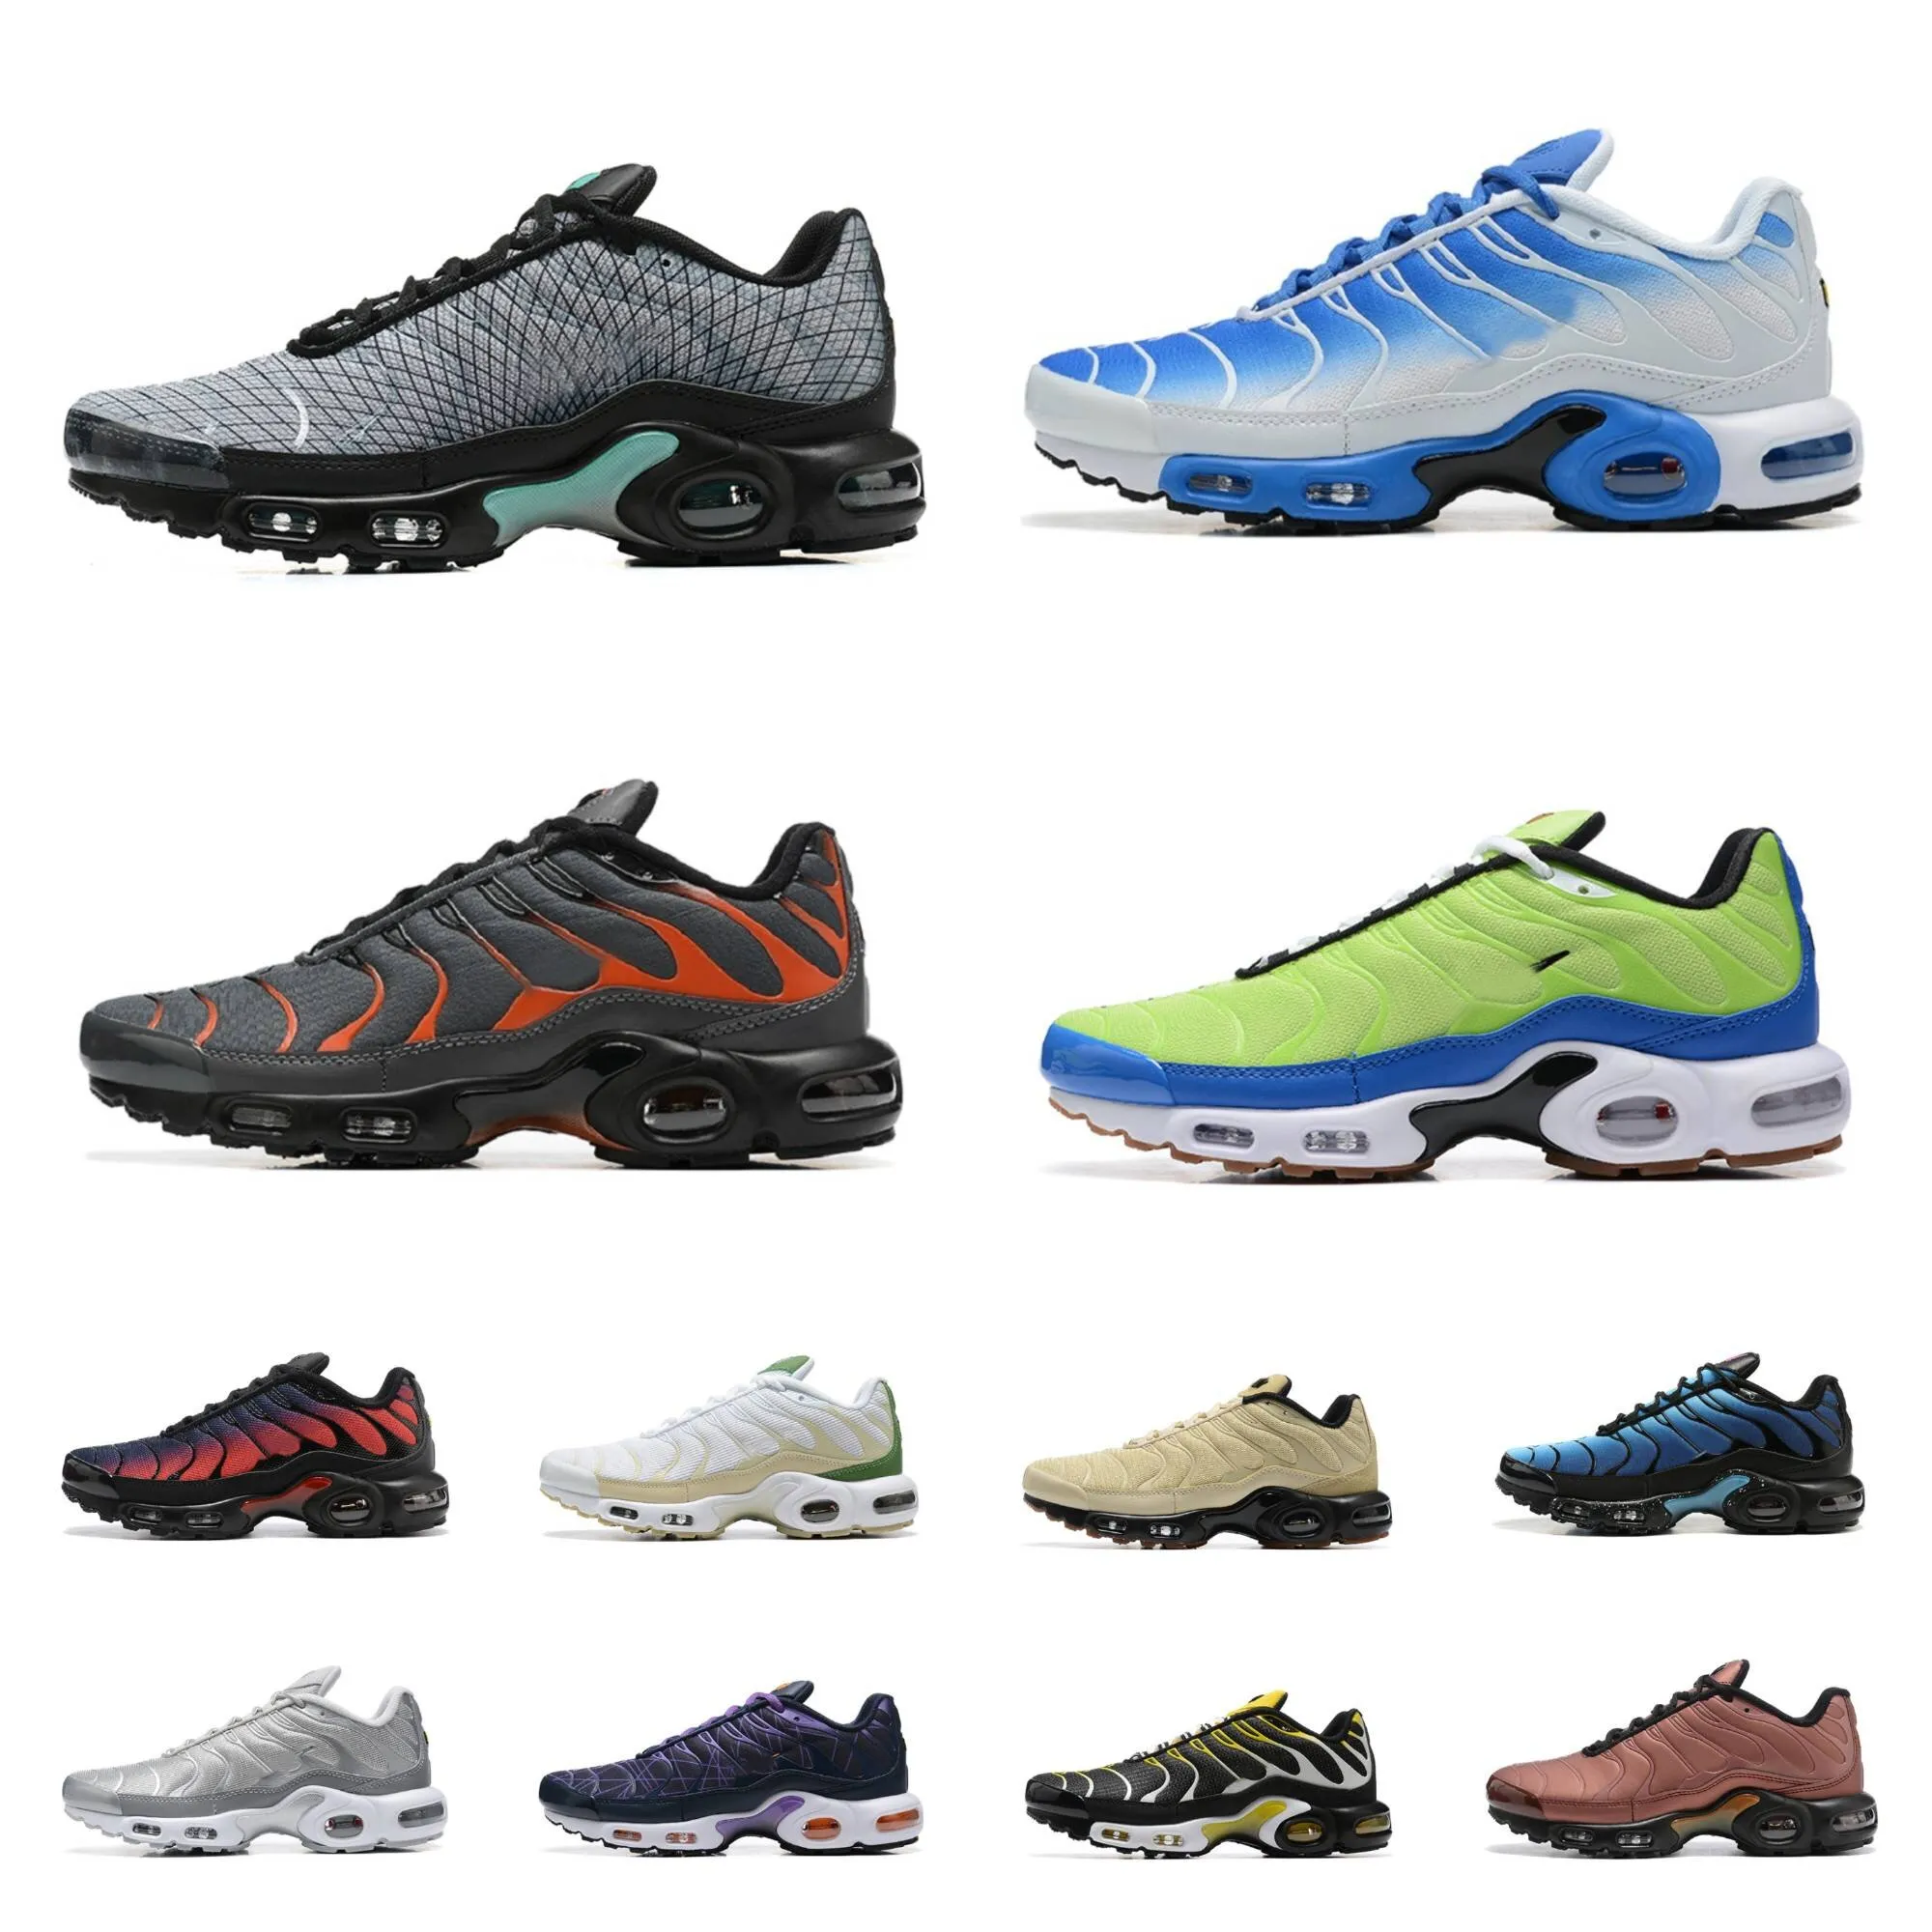 2023 Air Plus Max TN Running Shoes Mens Airmaxs TNS Terrascape Black Anthracite Mint Green University Blue Unity Reflective Bred Chaussure Requin Sneakers Trainers